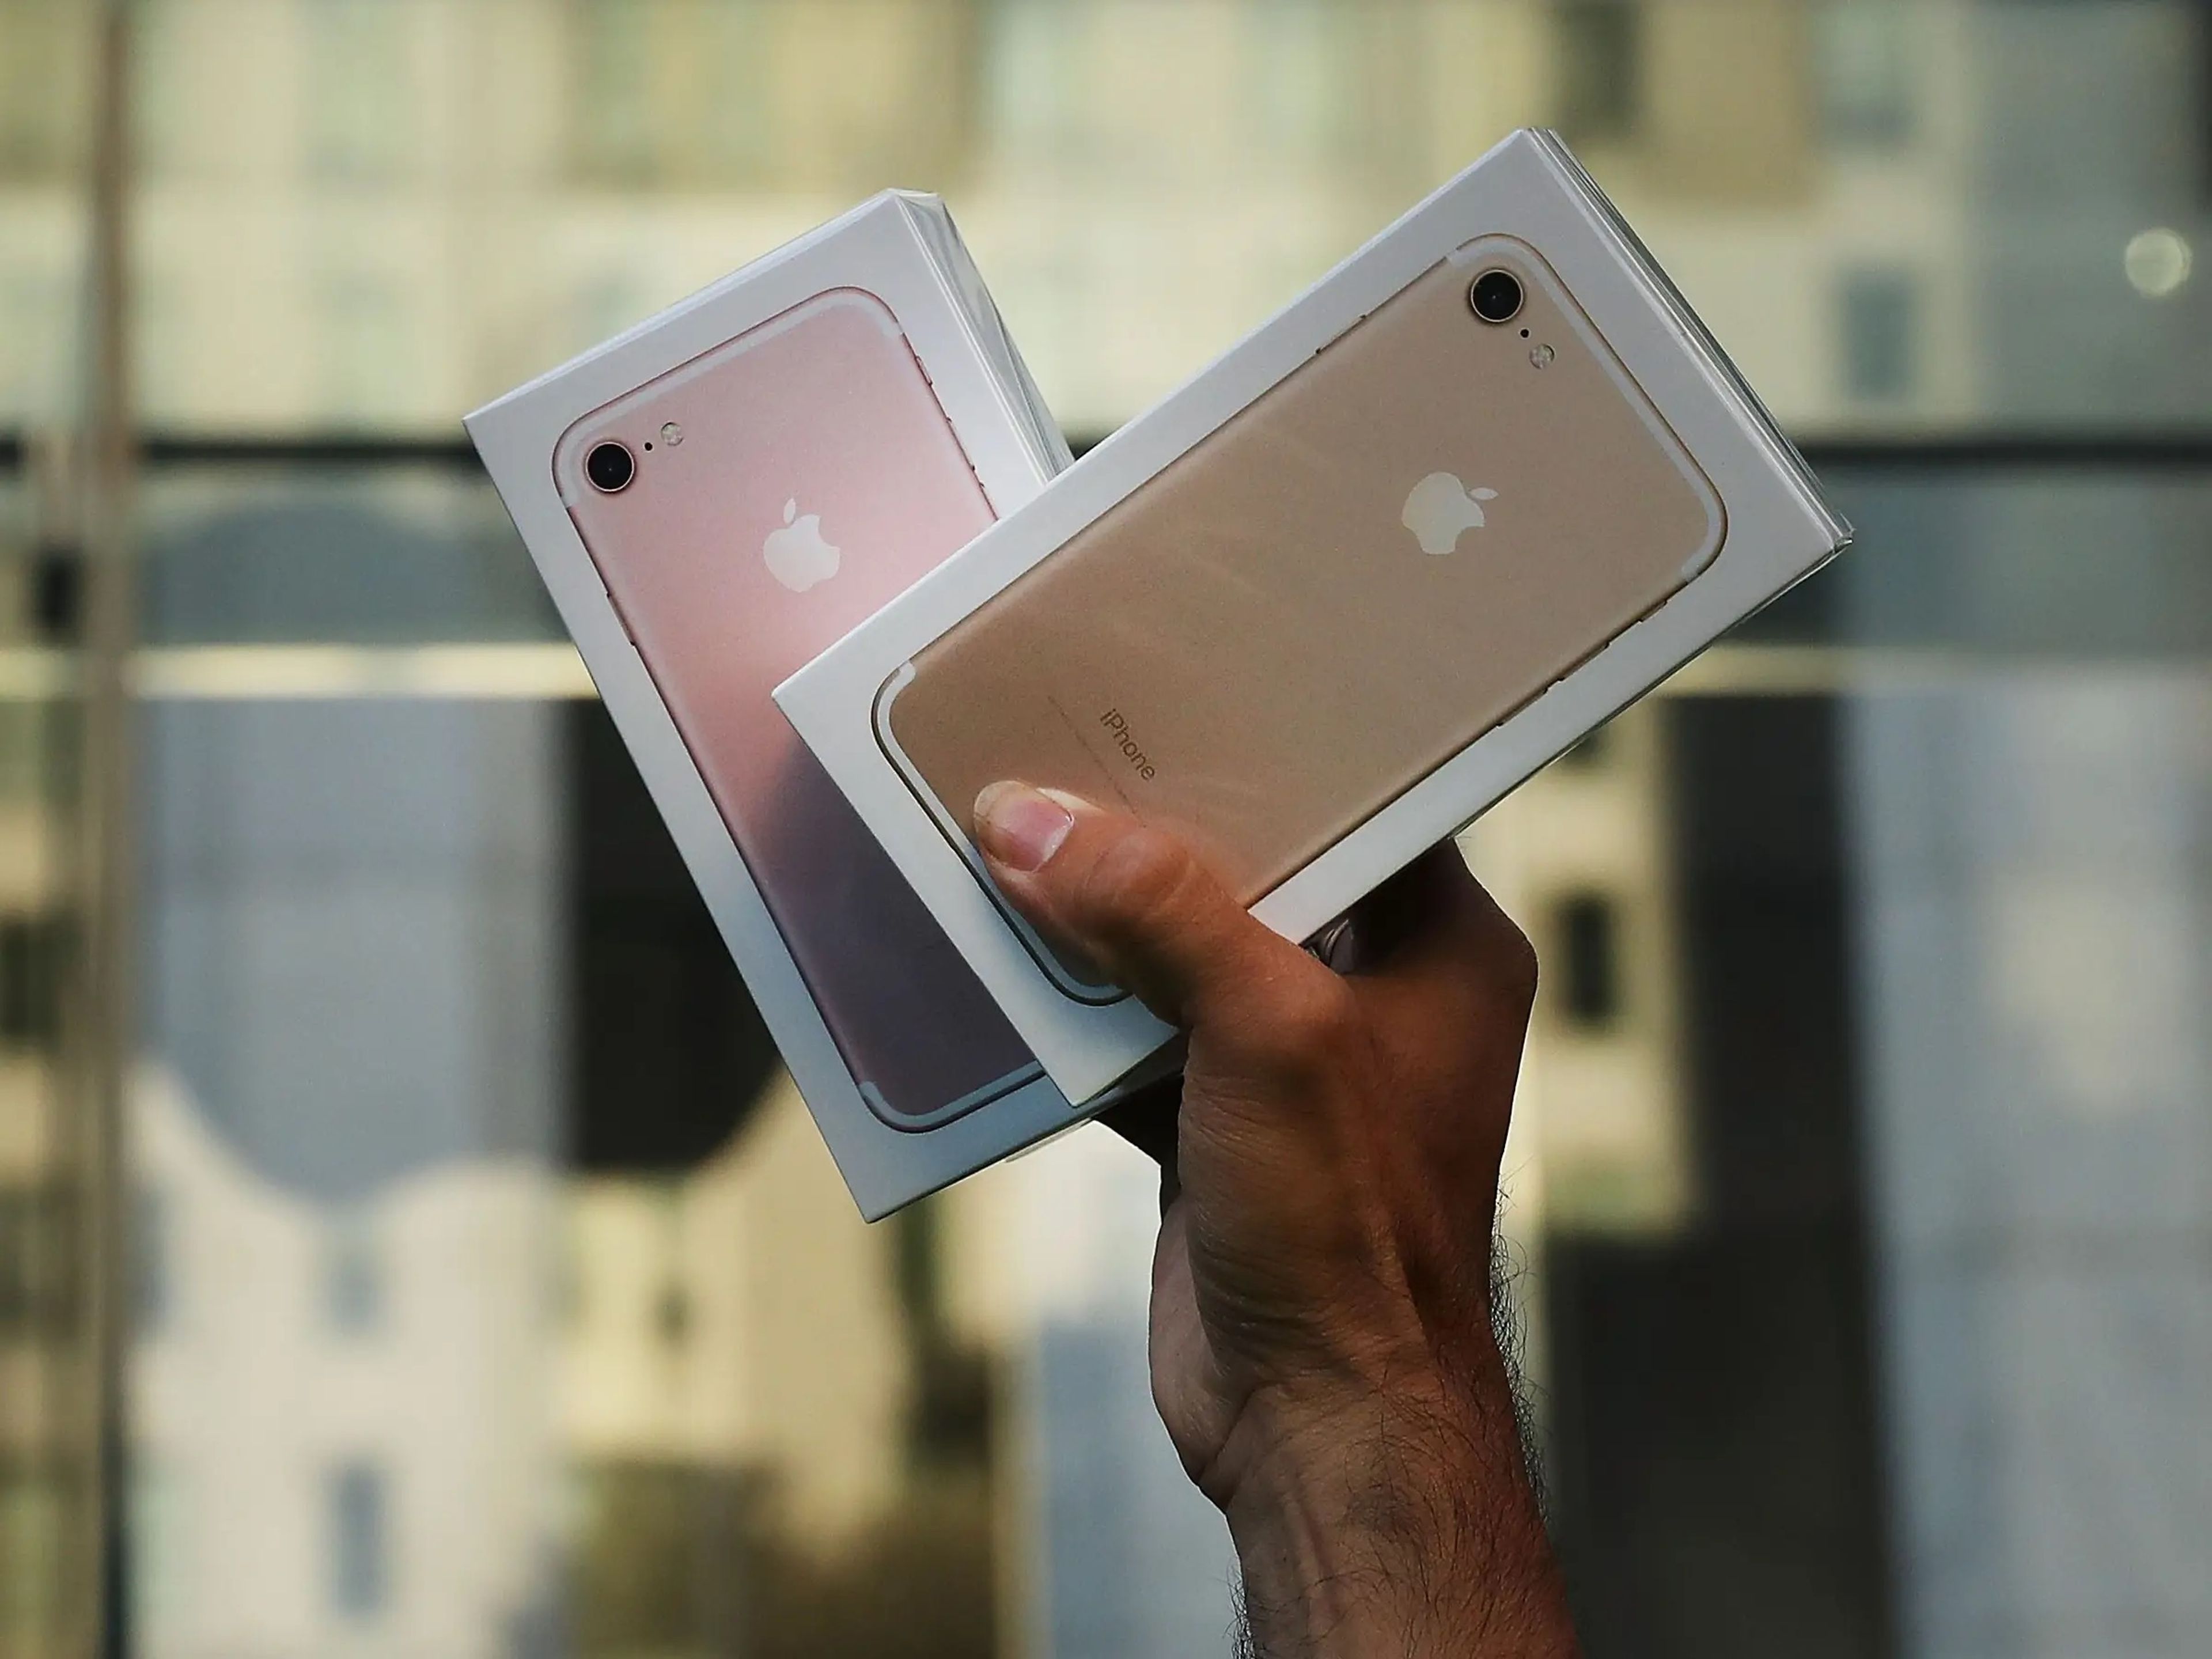 A hand holding a box for an iPhone 7 and iPhone 7 Plus